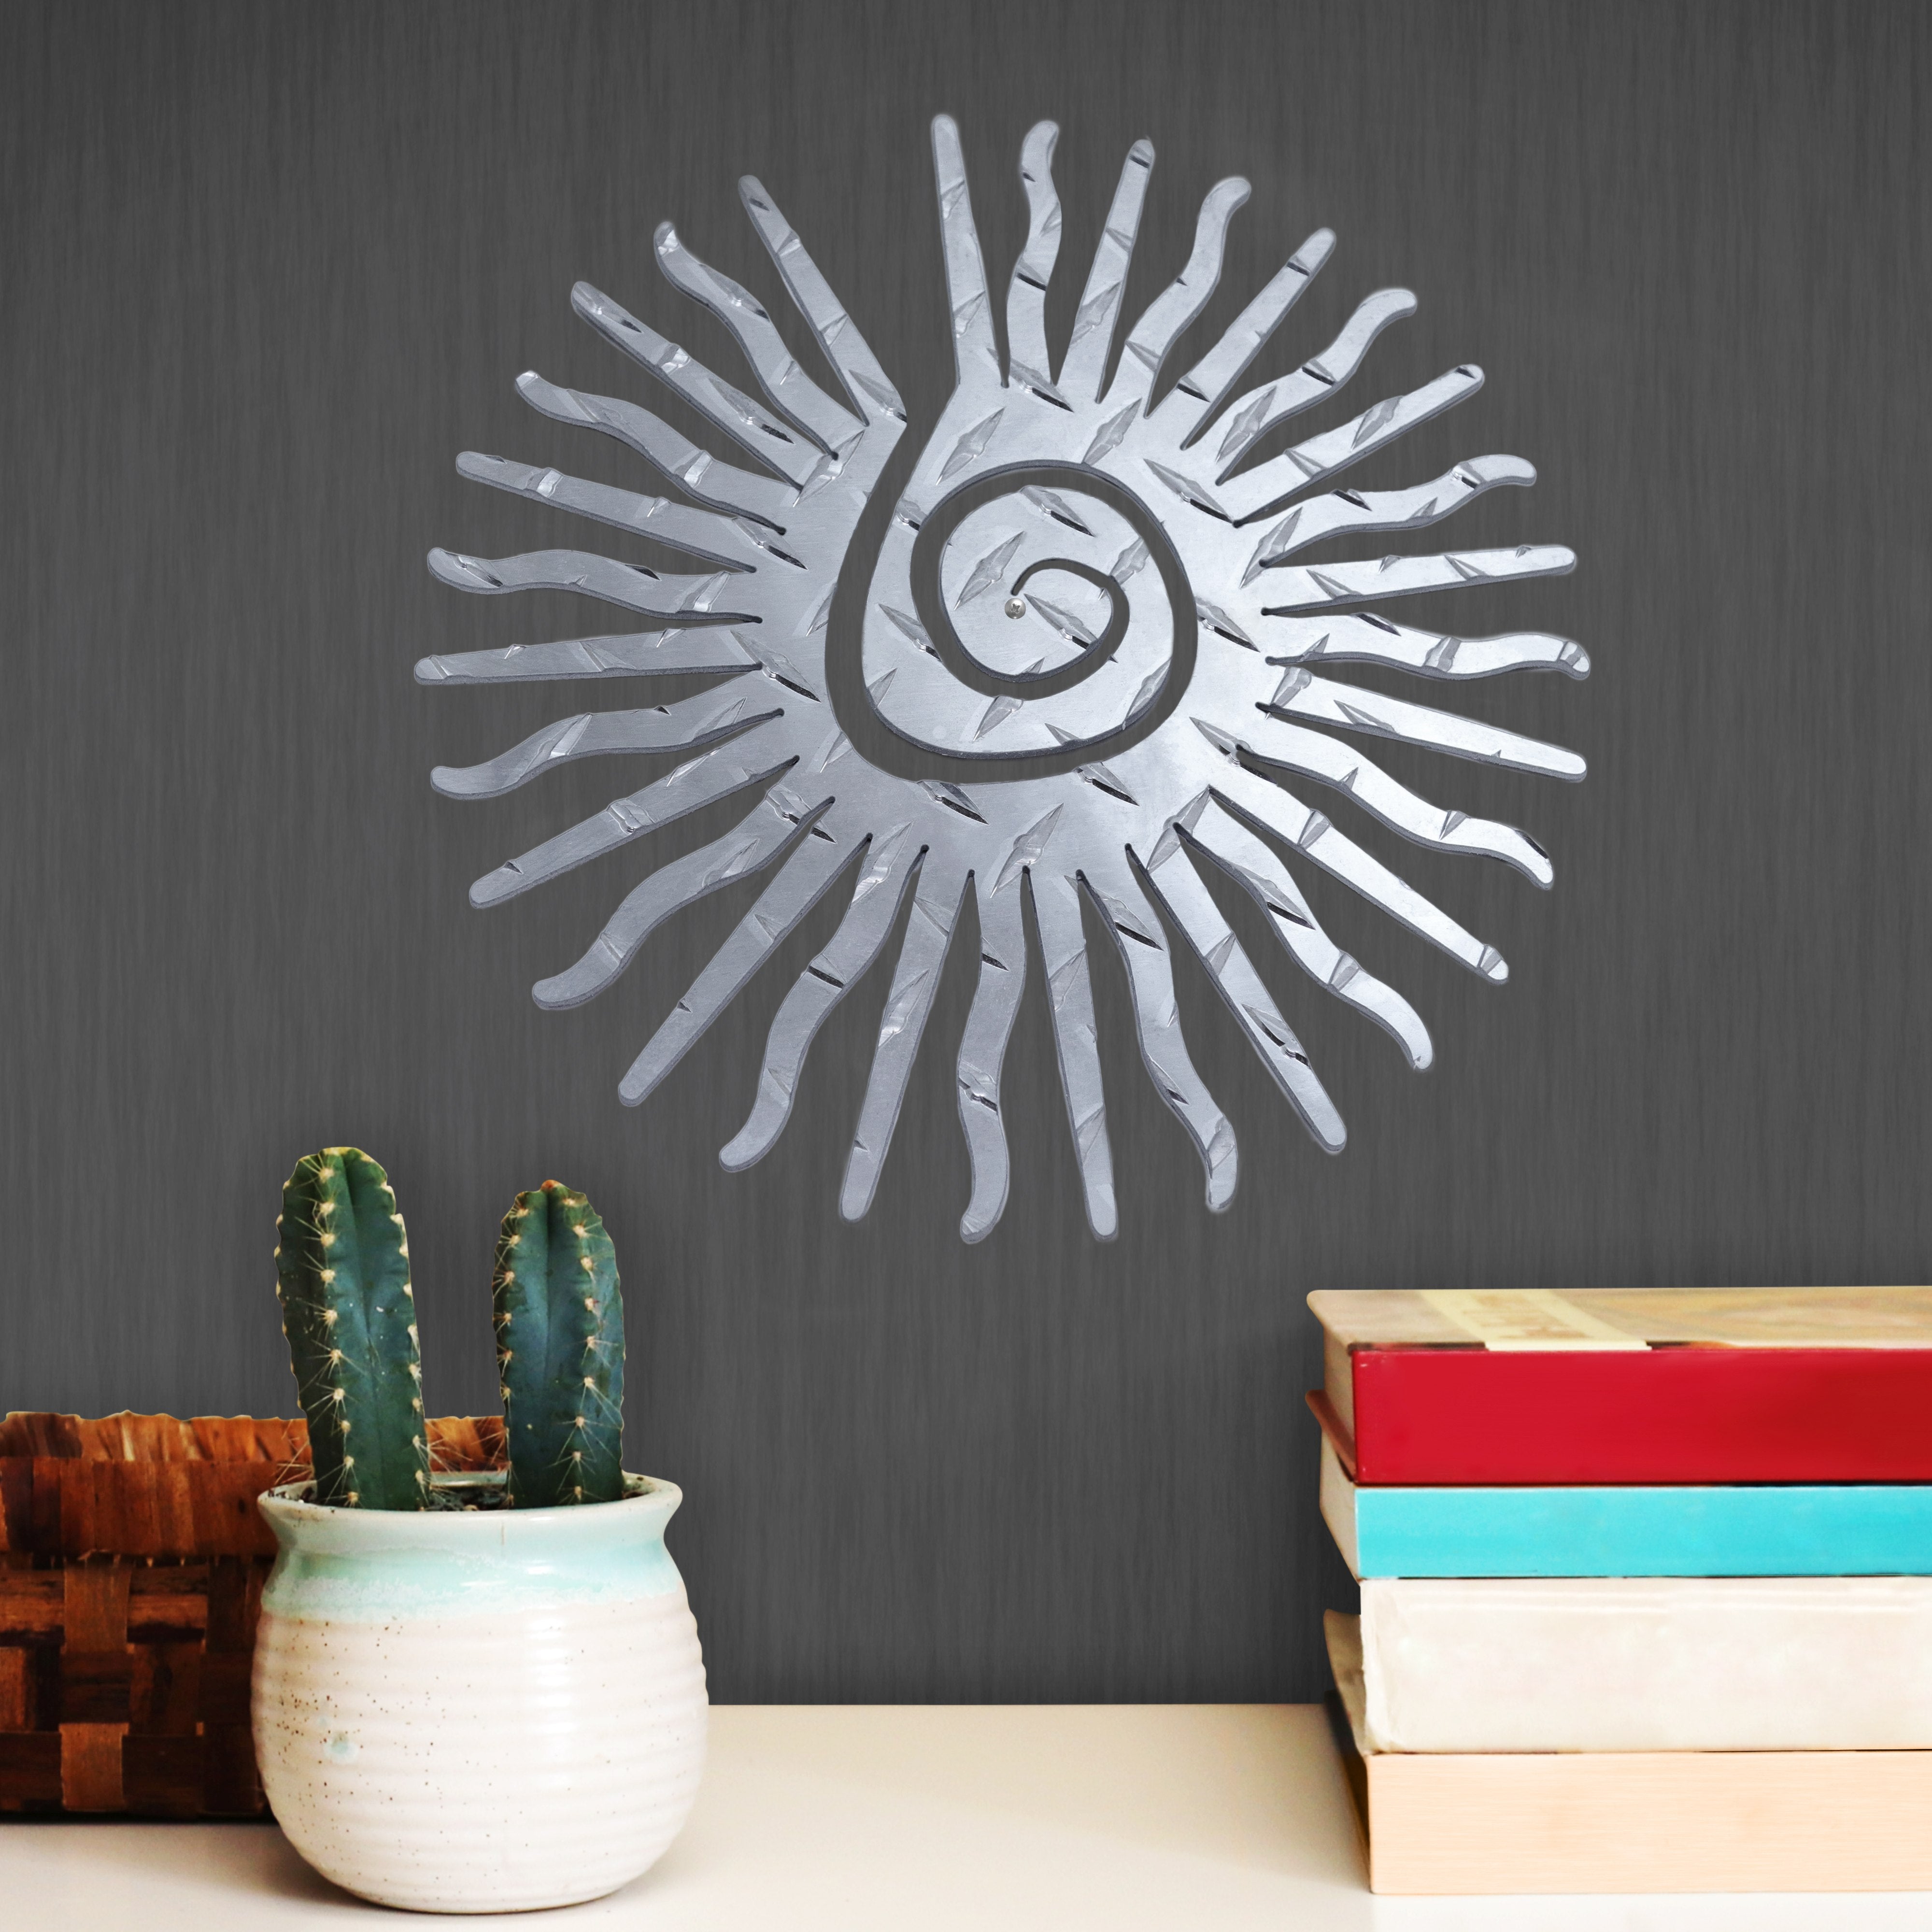 Spiral Sun Hanging Metal Wall Decor Durable Polished Aluminum Diamond Tread Pattern Indoor Outdoor with Mounting Hardware 12 Inches Wide